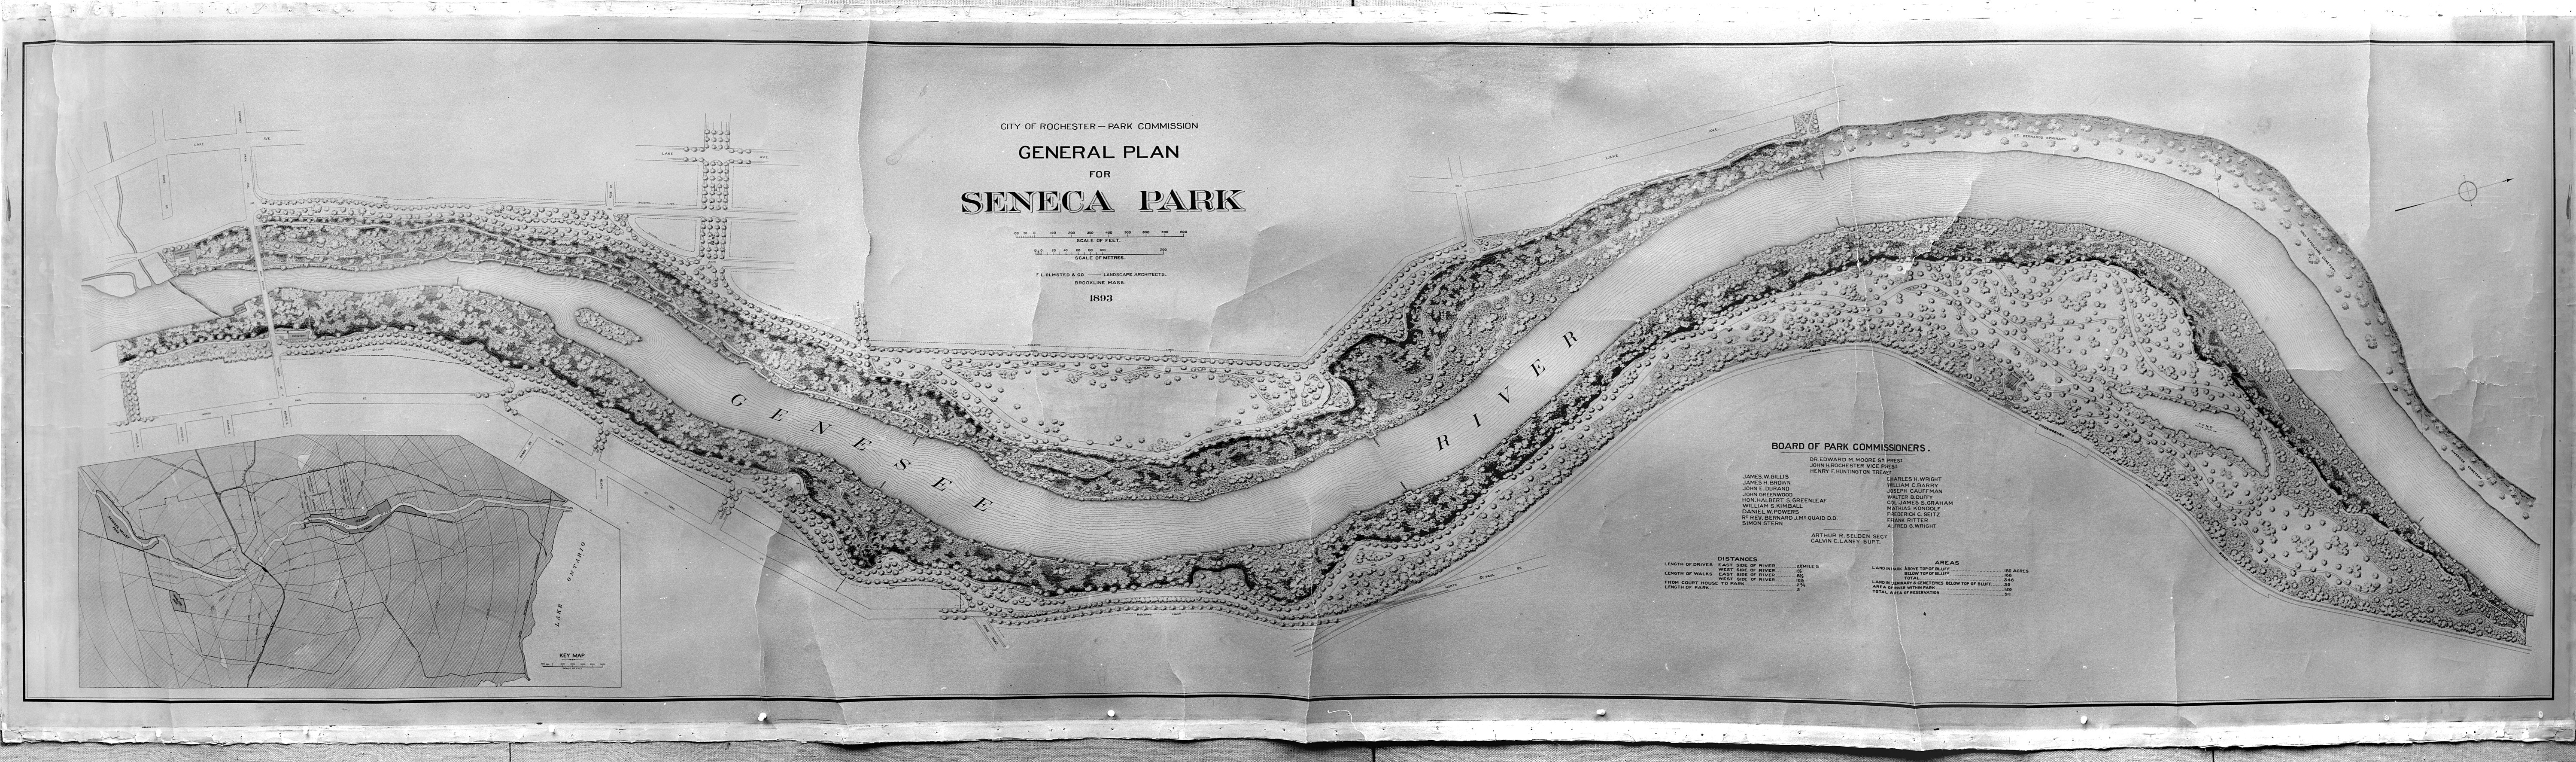 Original plan drawing of Seneca Park by Frederick Law Olmsted & Co.